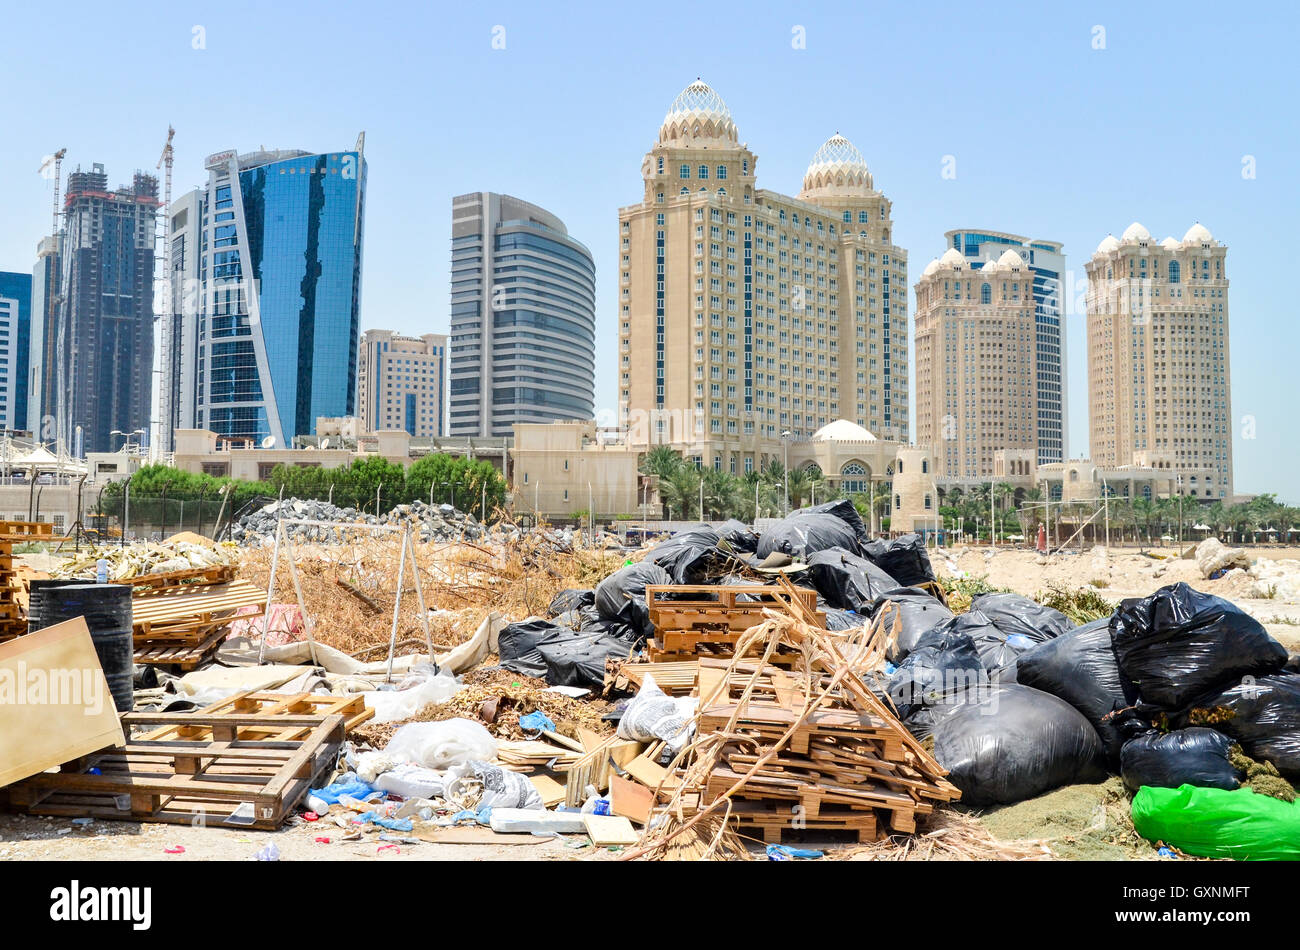 Trash on the beach in the West Bay financial district, Doha, Qatar Stock Photo